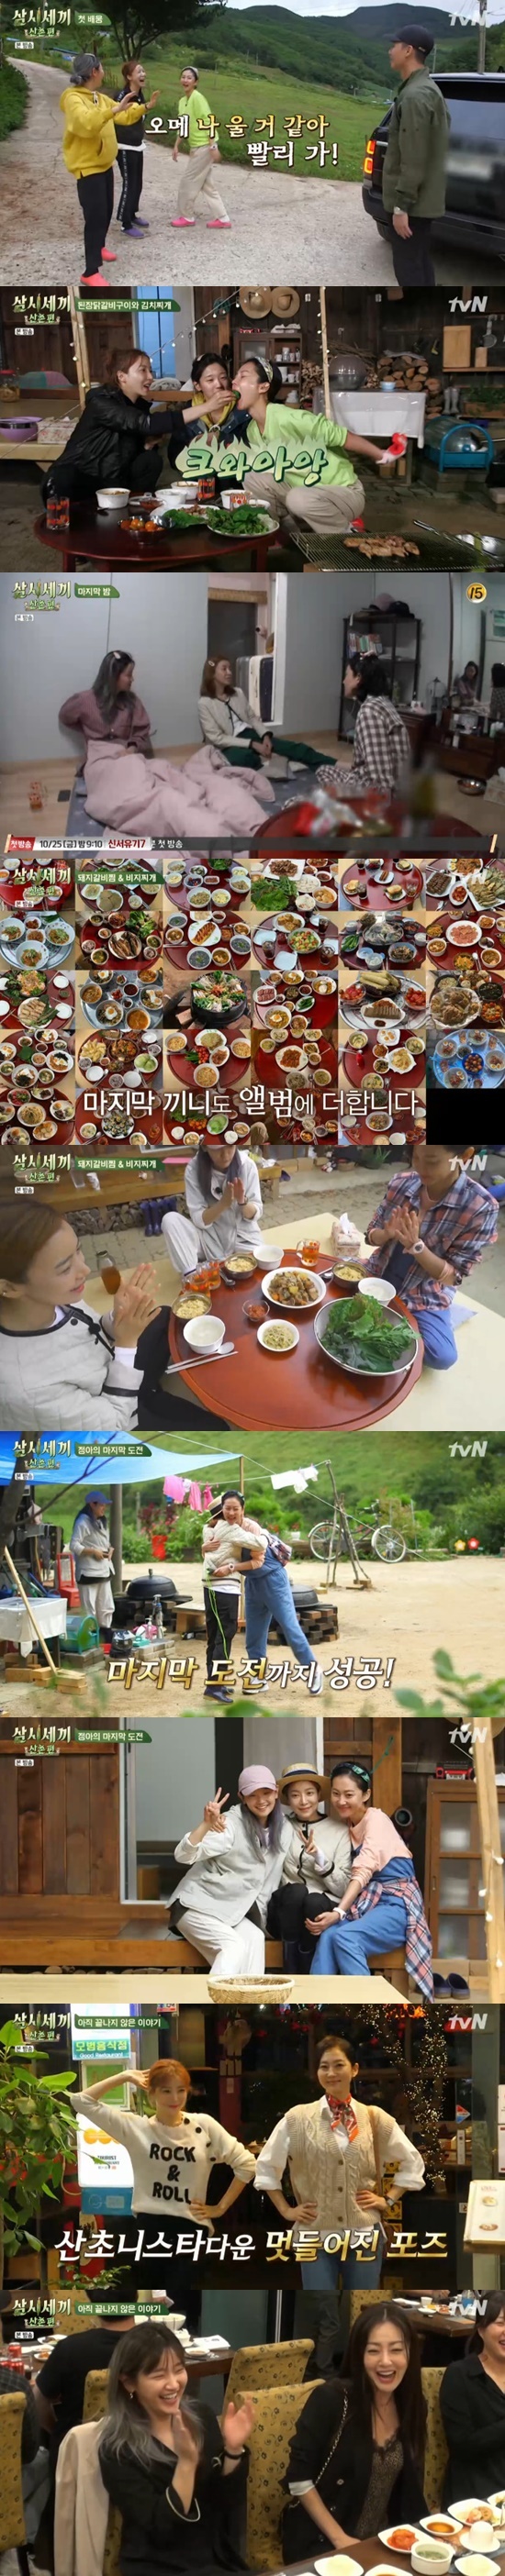 TVN Three Meals a Day Mountain Village (directed by Na Young-seok, Yang Se-gi) broadcasted at 9:10 pm on the 18th, depicted the last mountain village life of Yeom Jung-ah, Yun Se-ah and Park So-dam.Park Seo-joon and the three-kiss family started late lunch at 5:09 p.m. At late lunch, the three-kiss family quickly prepared lunch in a modest amount, unlike usual.After lunch, the members were all sorry for Park Seo-joon, who had to leave. I feel strange, said Yeom Jung-a and Yunsea, who were seeing Park Seo-joon.I think I will cry, he said to Park Seo-joon with a look full of regret.Park Seo-joon left, and the three families immediately spurred lunch preparation: miso chicken ribs and kimchi stew.Yeom Jeong-ah baked chicken ribs right next to the table and added flavor. The three families enjoyed dinner, wrapping each other.Yeom Jeong-ah baked chicken ribs for the staff. He looked at the delicious staff.It was the last night of the mountain village, and the three families talked about the last night and talked about Doran Doran.In the morning, the three families woke up as usual, visited the chicken coop, drank coffee and spent a normal morning.The three families made Cube Latte using Dutch coffee and coffee ice that they had made in advance.The menu for the last feast was set with a Pork ribs steamed and a non-jijijigae; Park So-dam began to grind the sour beans into the millstone.Yeom Jeong-ah boiled the bean-curd dregs stew using roasted kimchi and bean-curd dregs ground by Park So-dam, and then moved the ripe Pork ribs steamed into a barrel, washed the pot again and boiled it to the scorched rice.At the last meal, the three families began to eat with admiration.After finishing the meal, I was continuing to organize it, and the production team came up with a jump rope in the proposal that I will wash the dishes if I have 20 jump ropes.Yeom Jeong-a also succeeded in the final rope-skipping challenge with 25.I am grateful that everyone ate delicious, and I think I will remember it as a time when I was just happy, he said.Yoonsea said, Sodam is always pretty, follows me, takes care of me, and my sister is always a sister, and it feels like a story that was possible because we are all.Park said, I think the moments of eating rice will continue to be thought of. It is so good to be able to put down a lot, get a lot of power, laugh a lot.I think I can run again with this energy. The three families were presented with an album that reminded them of their mountain village life and cabbage they planted at the last full dinner with the staff, and laughed at the time.On the other hand, Three Meals a Day Mountain Village followed by Shin Seo Yugi 7 was released and added to expectations.